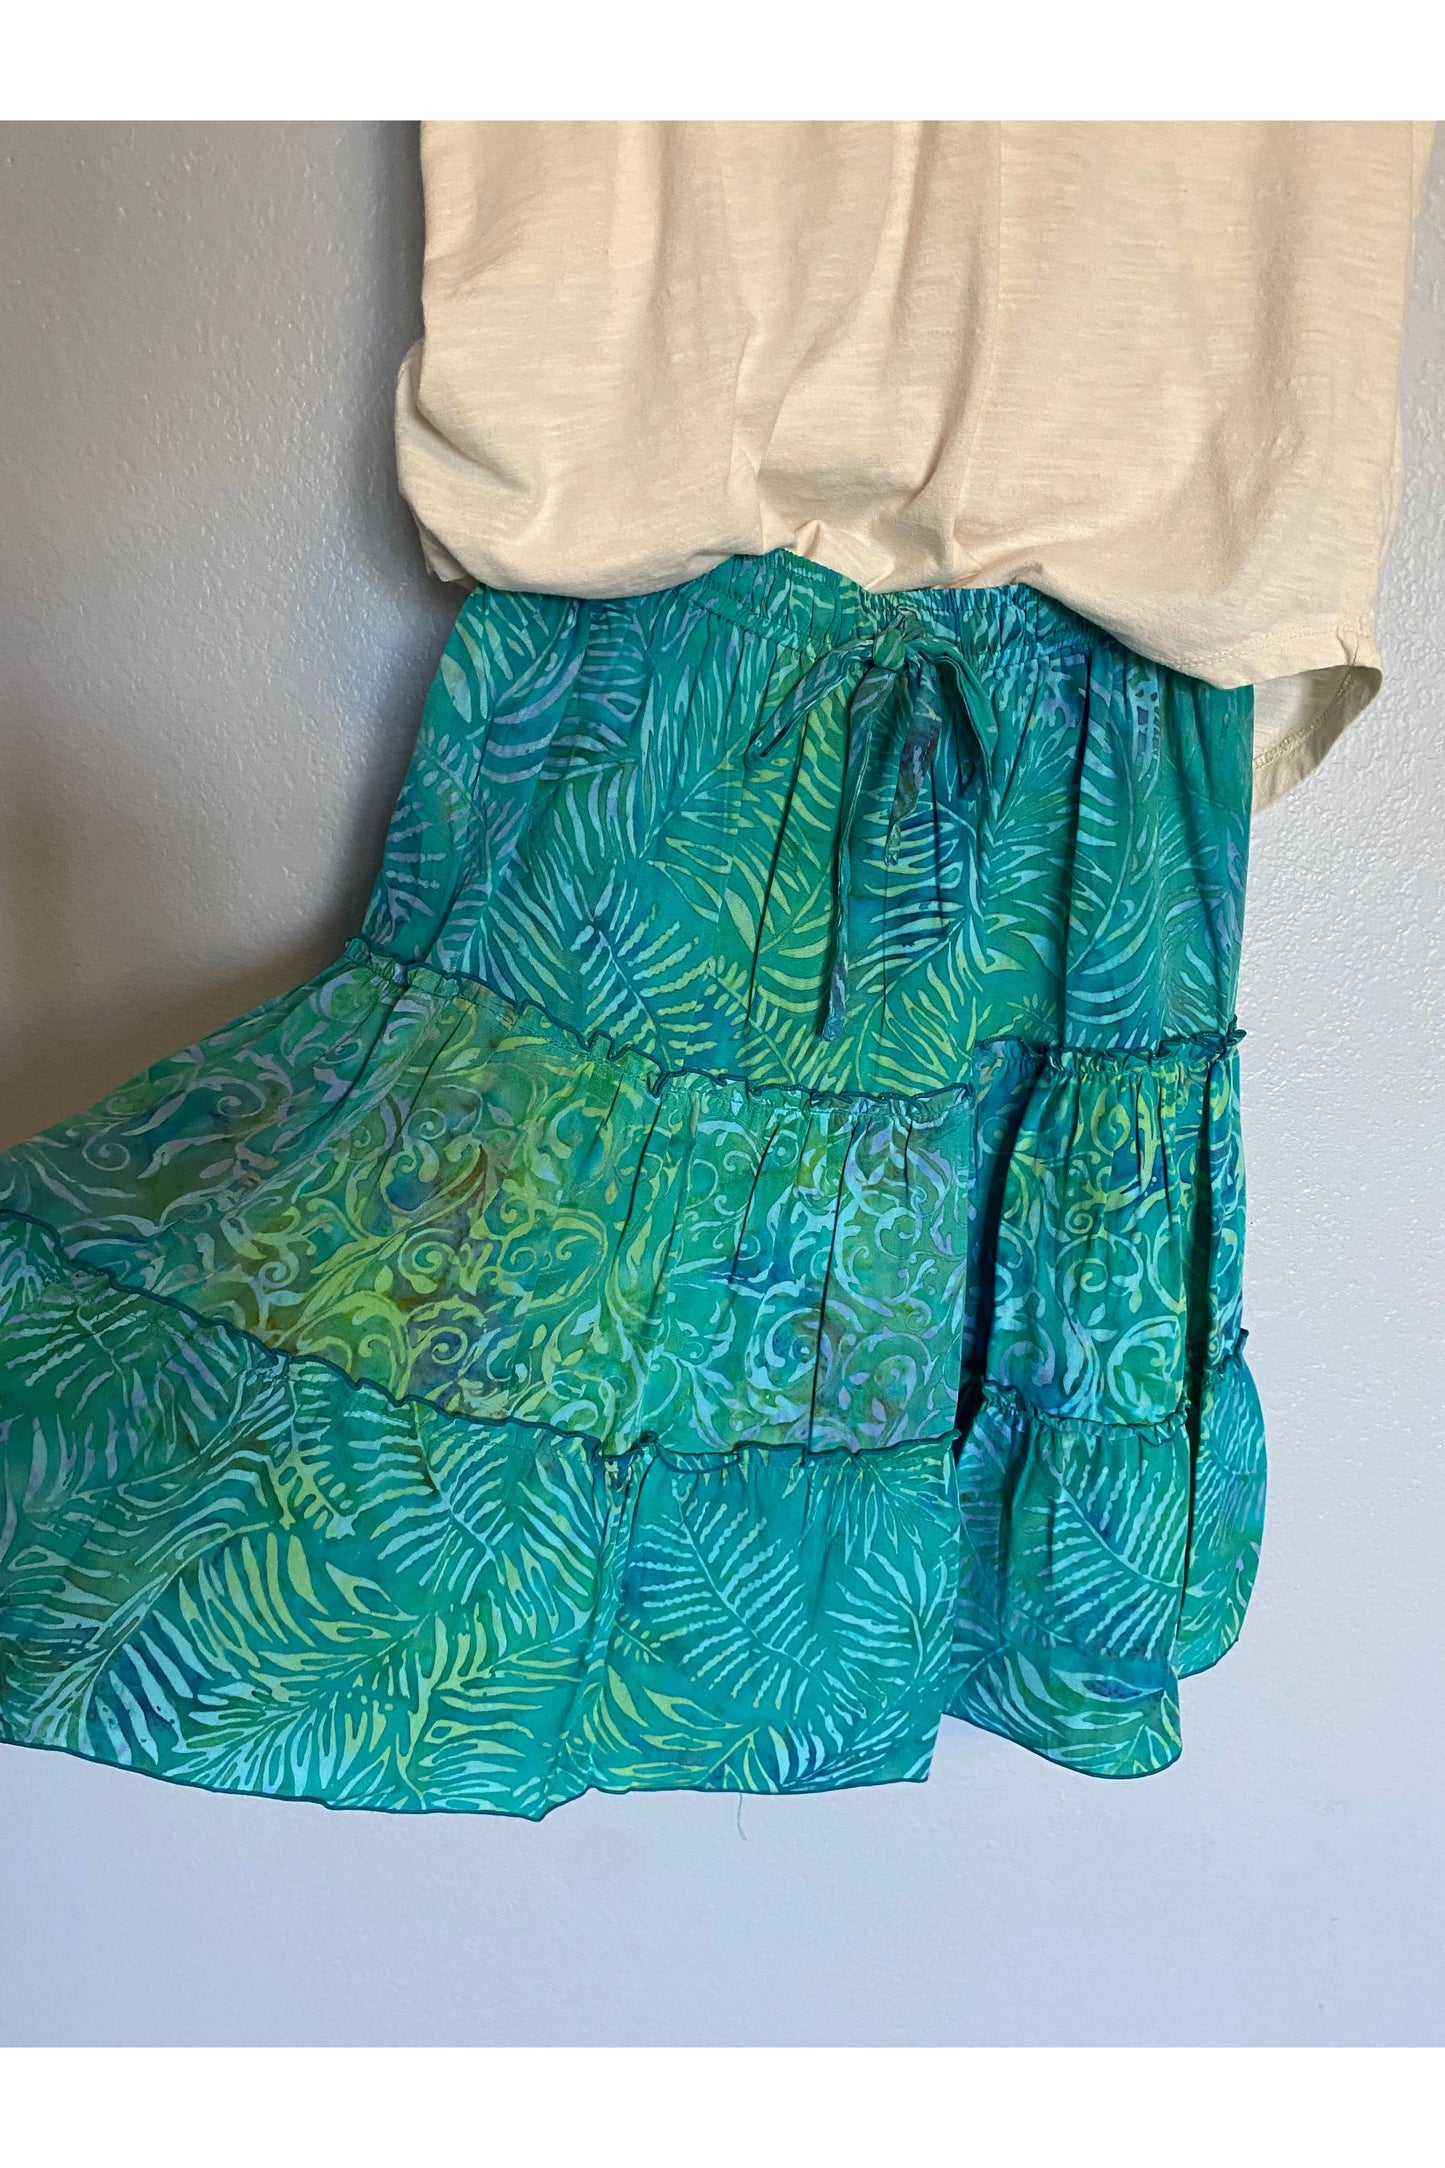 Hand Kreation - 3 Tier Gypsy Skirt  -Two color/print Options -  Y8703 & S803